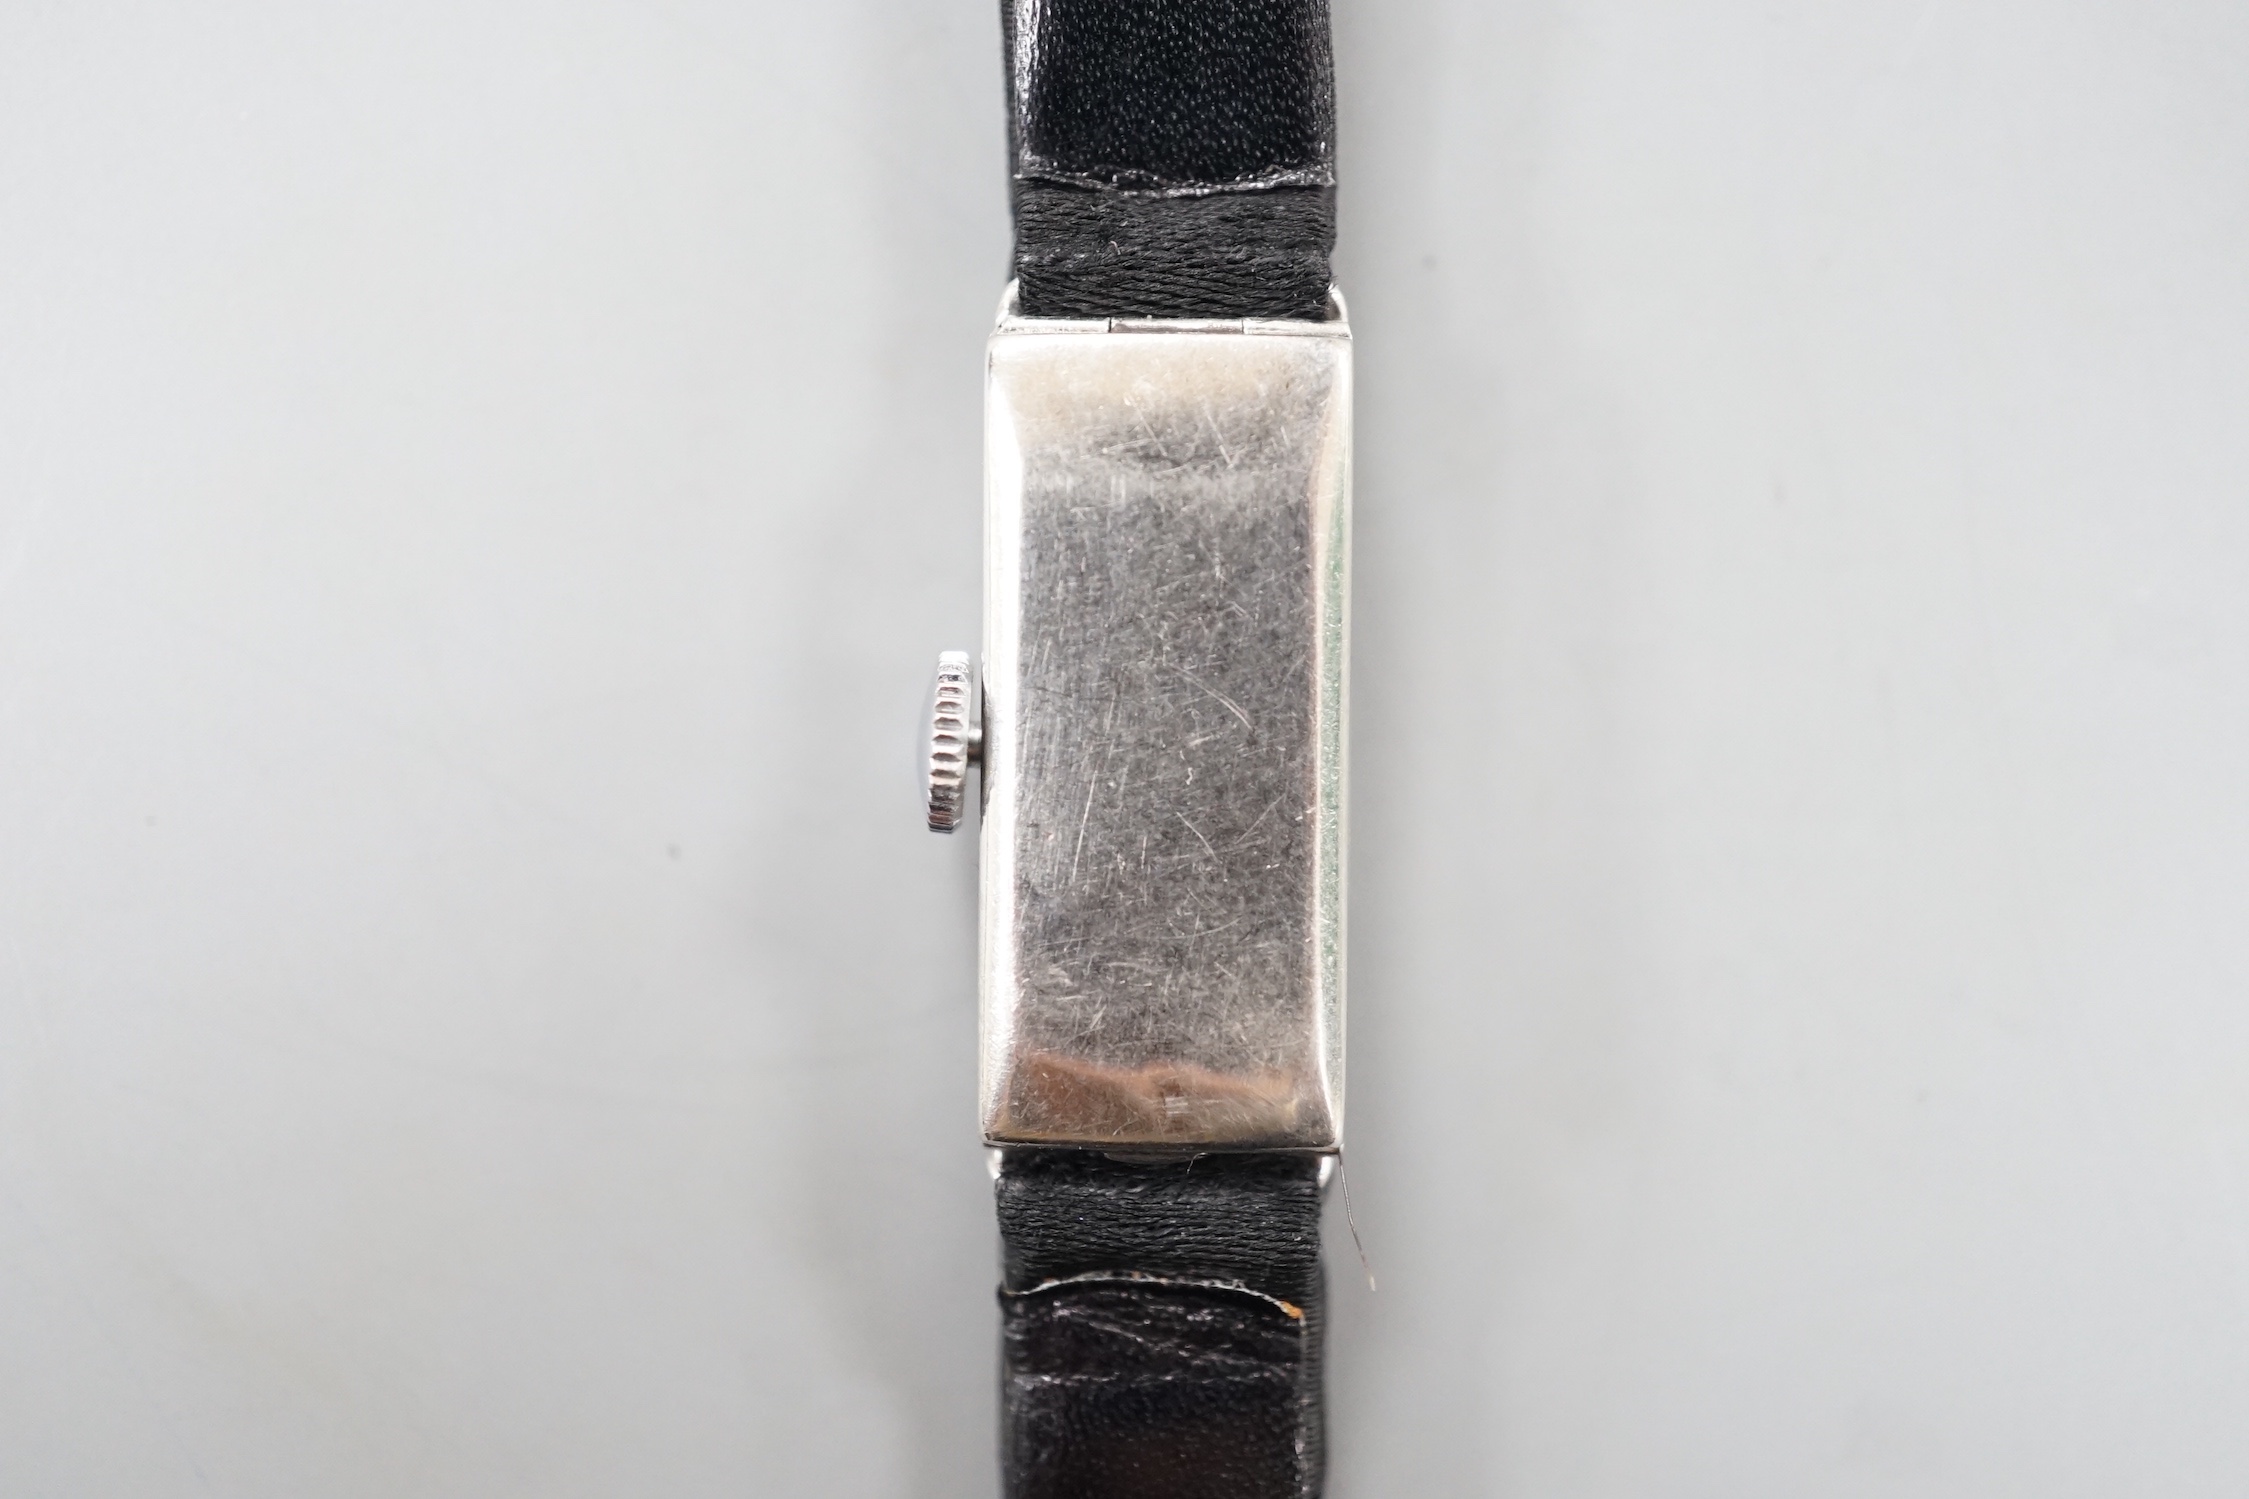 A lady's white meat (stamped Platinum) and diamond set rectangular manual wind cocktail watch, case diameter 11mm, on a black fabric strap, gross weight 10.3 grams.